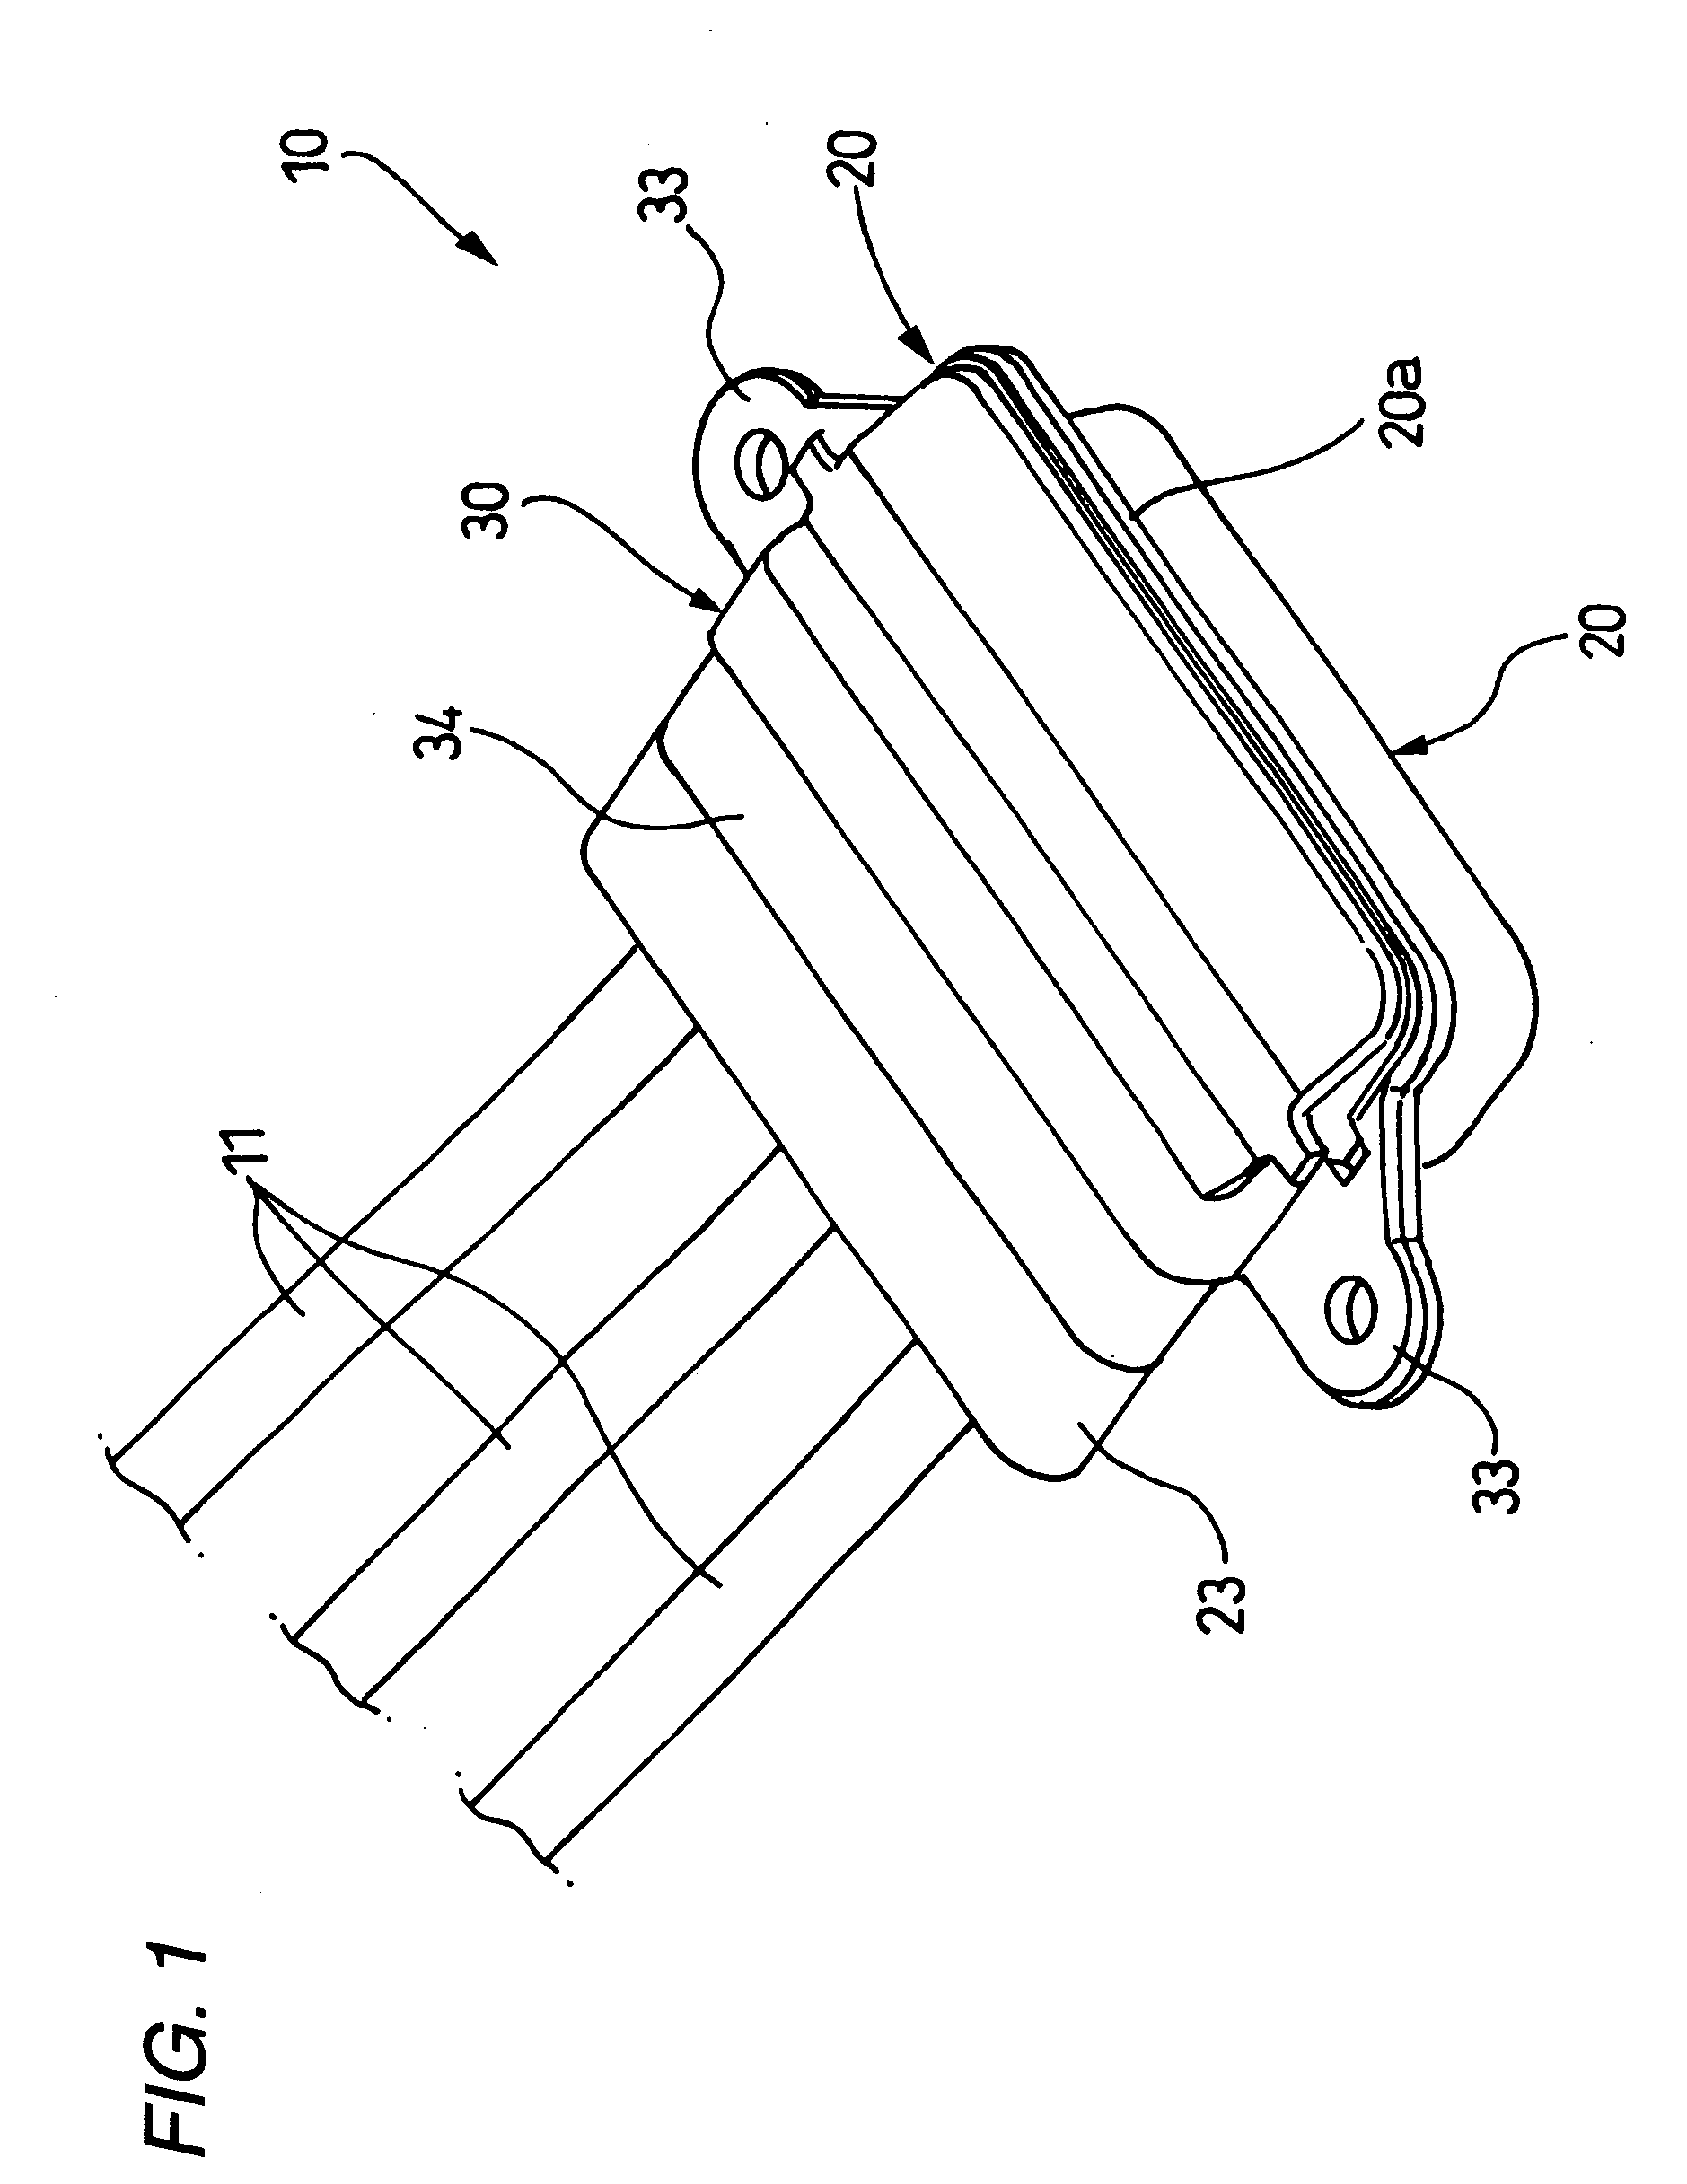 Electromagnetic interference shielded connector and method for assembling the same